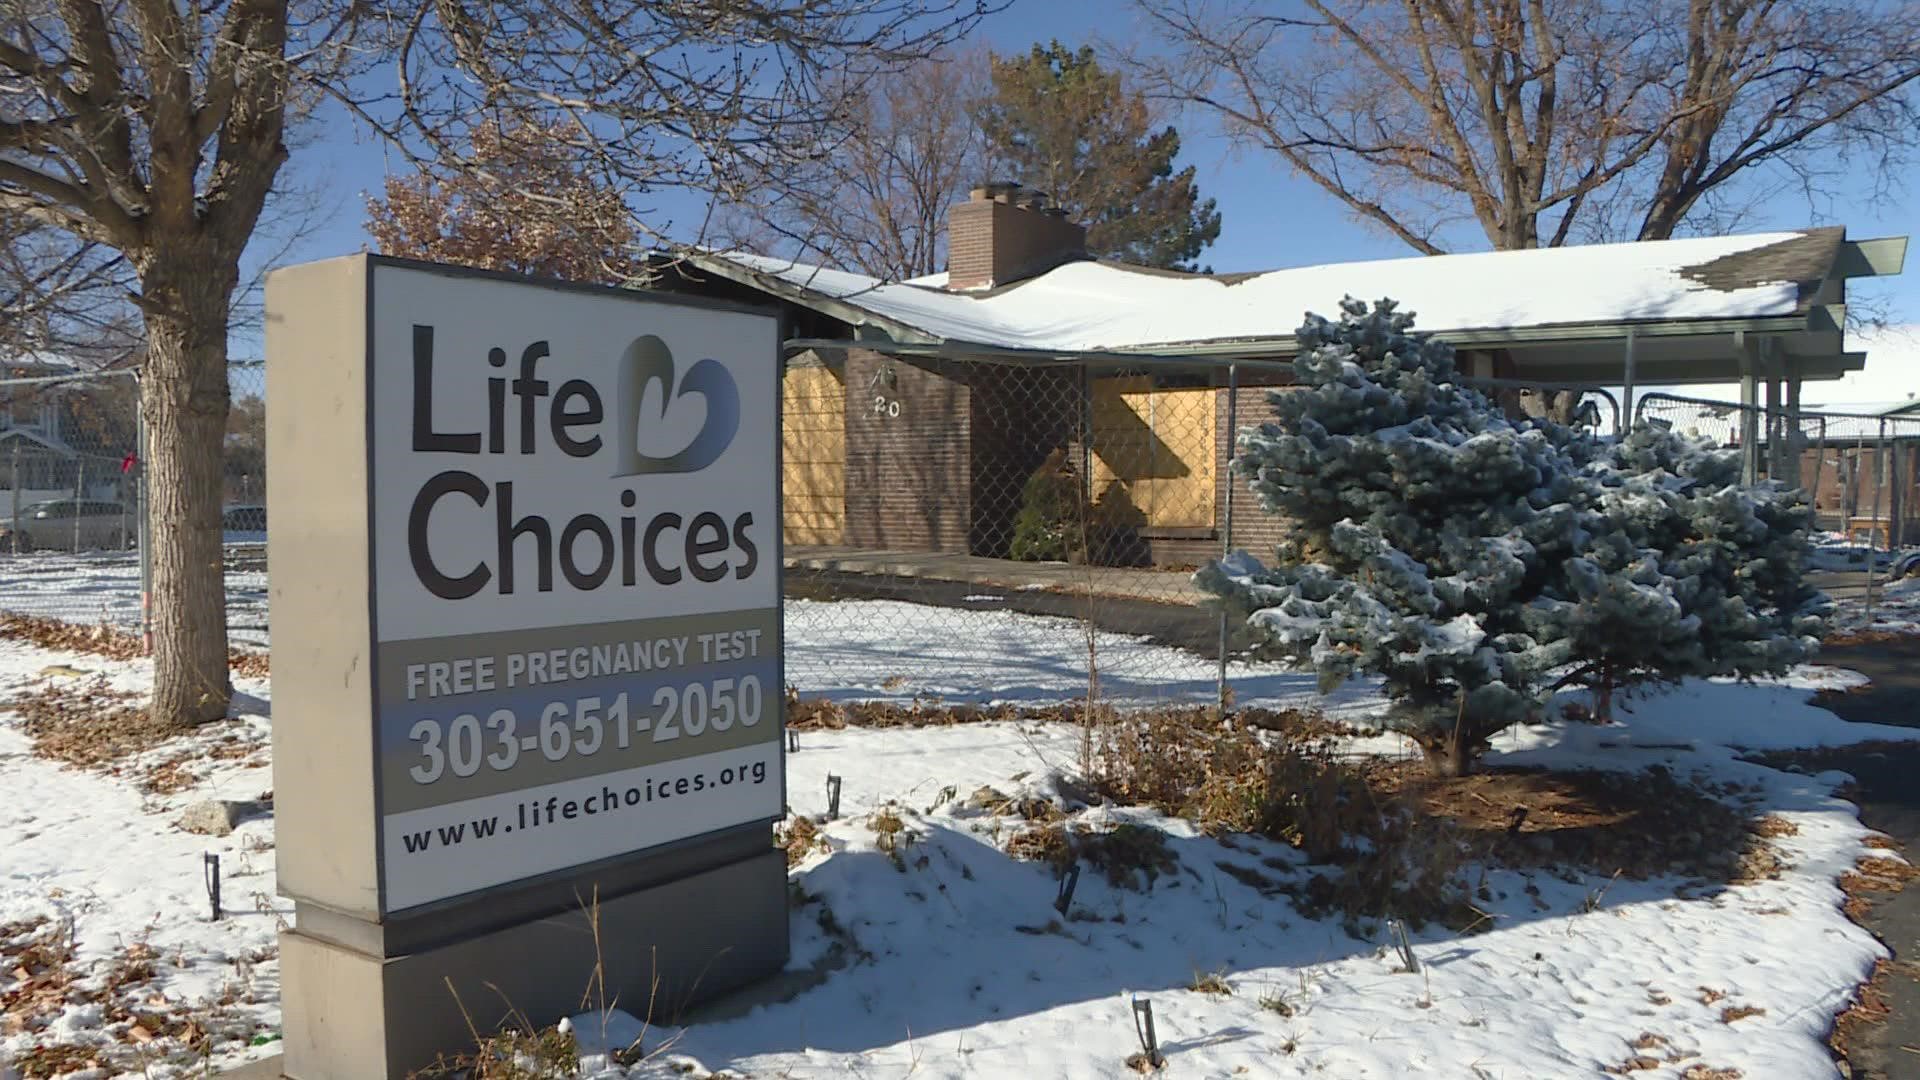 The FBI increased the reward for information leading to the arrest of those responsible for a fire at an abortion alternatives ministry in Longmont in June.